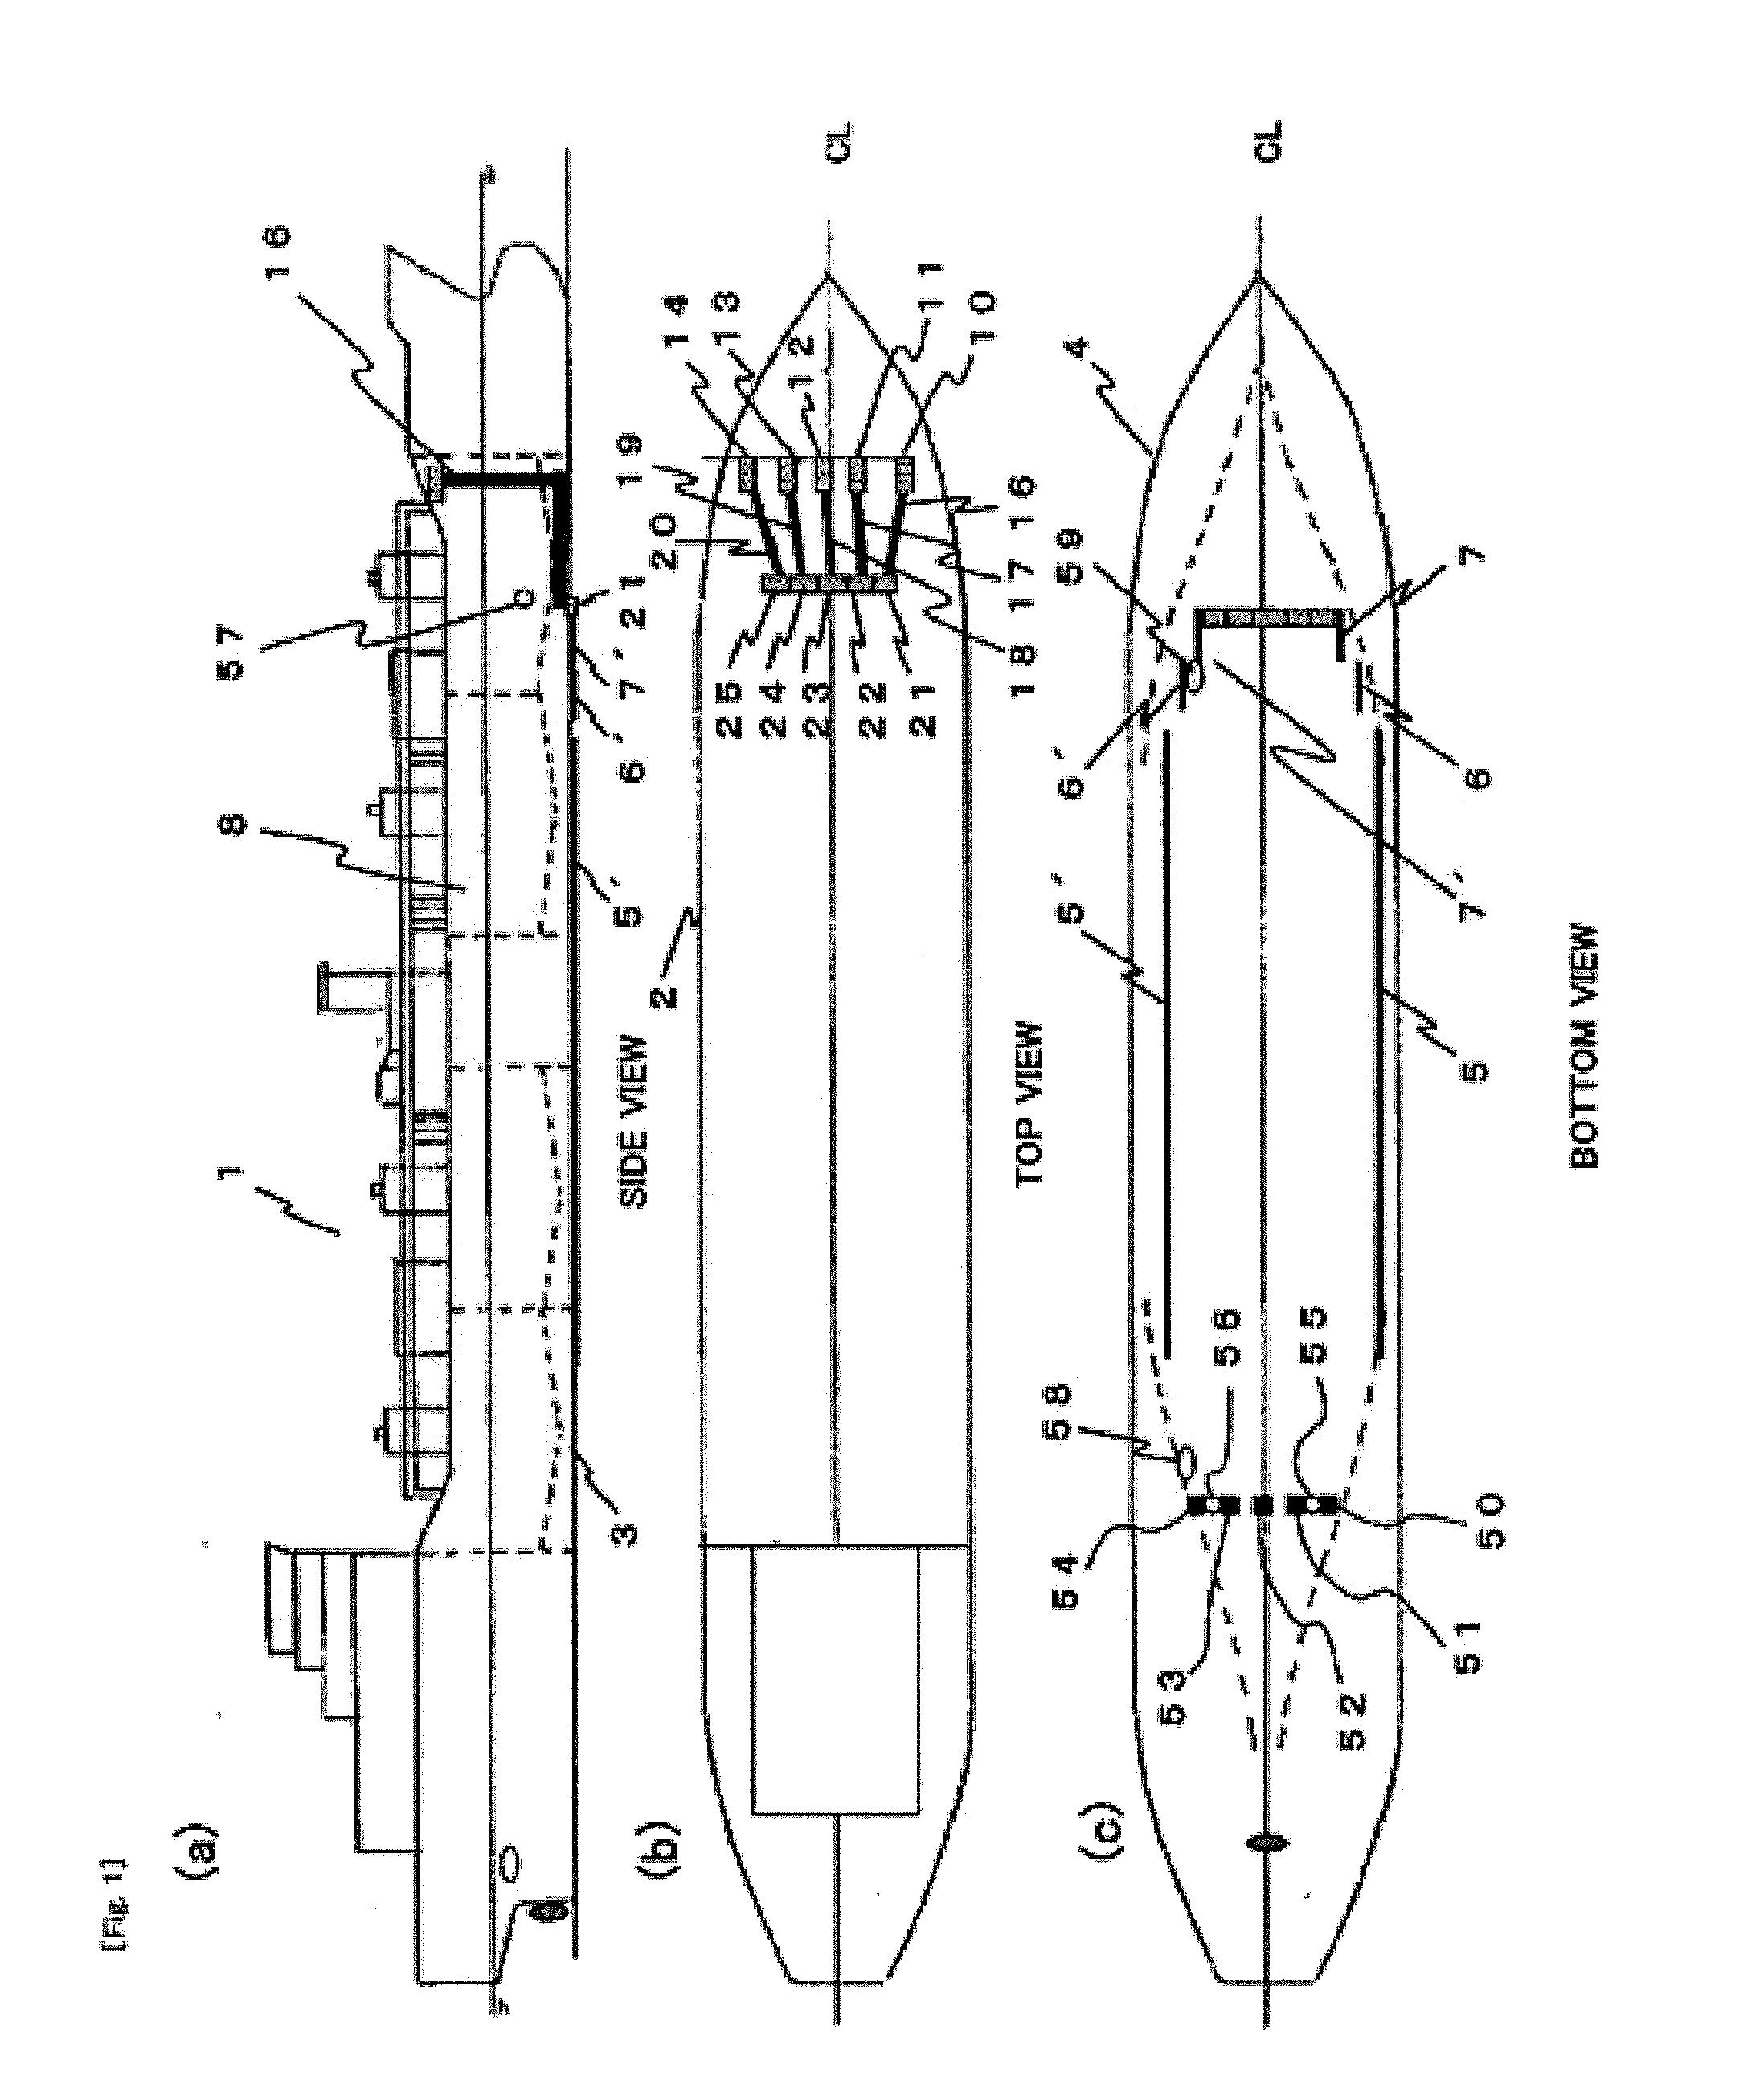 Frictional resistance reduction device for ship